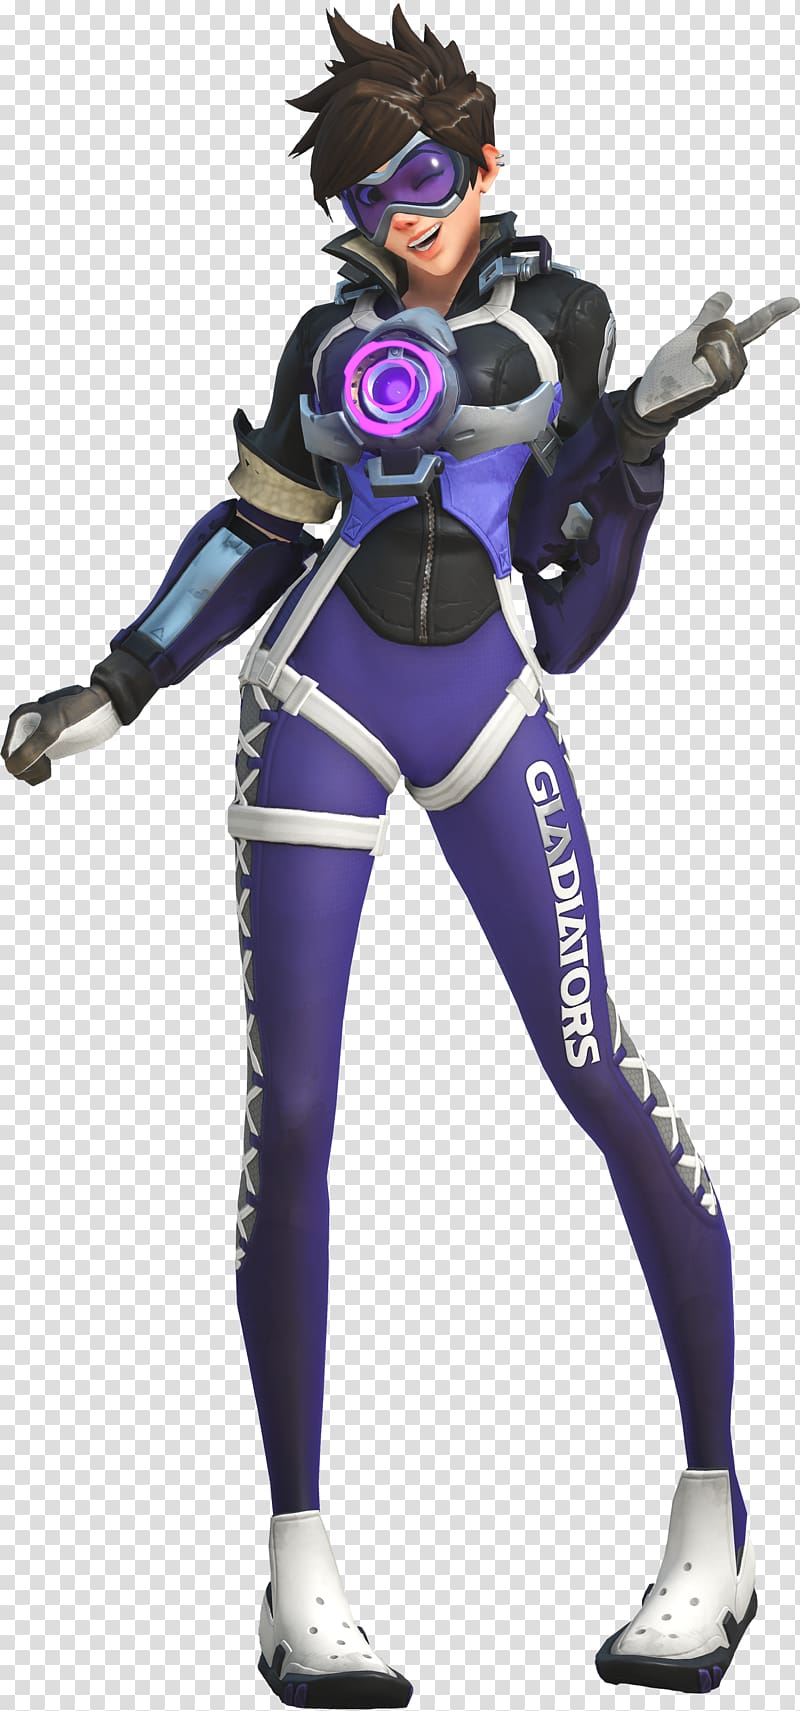 Overwatch Tracer Blizzard Entertainment Victory pose World of Warcraft, world of warcraft transparent background PNG clipart